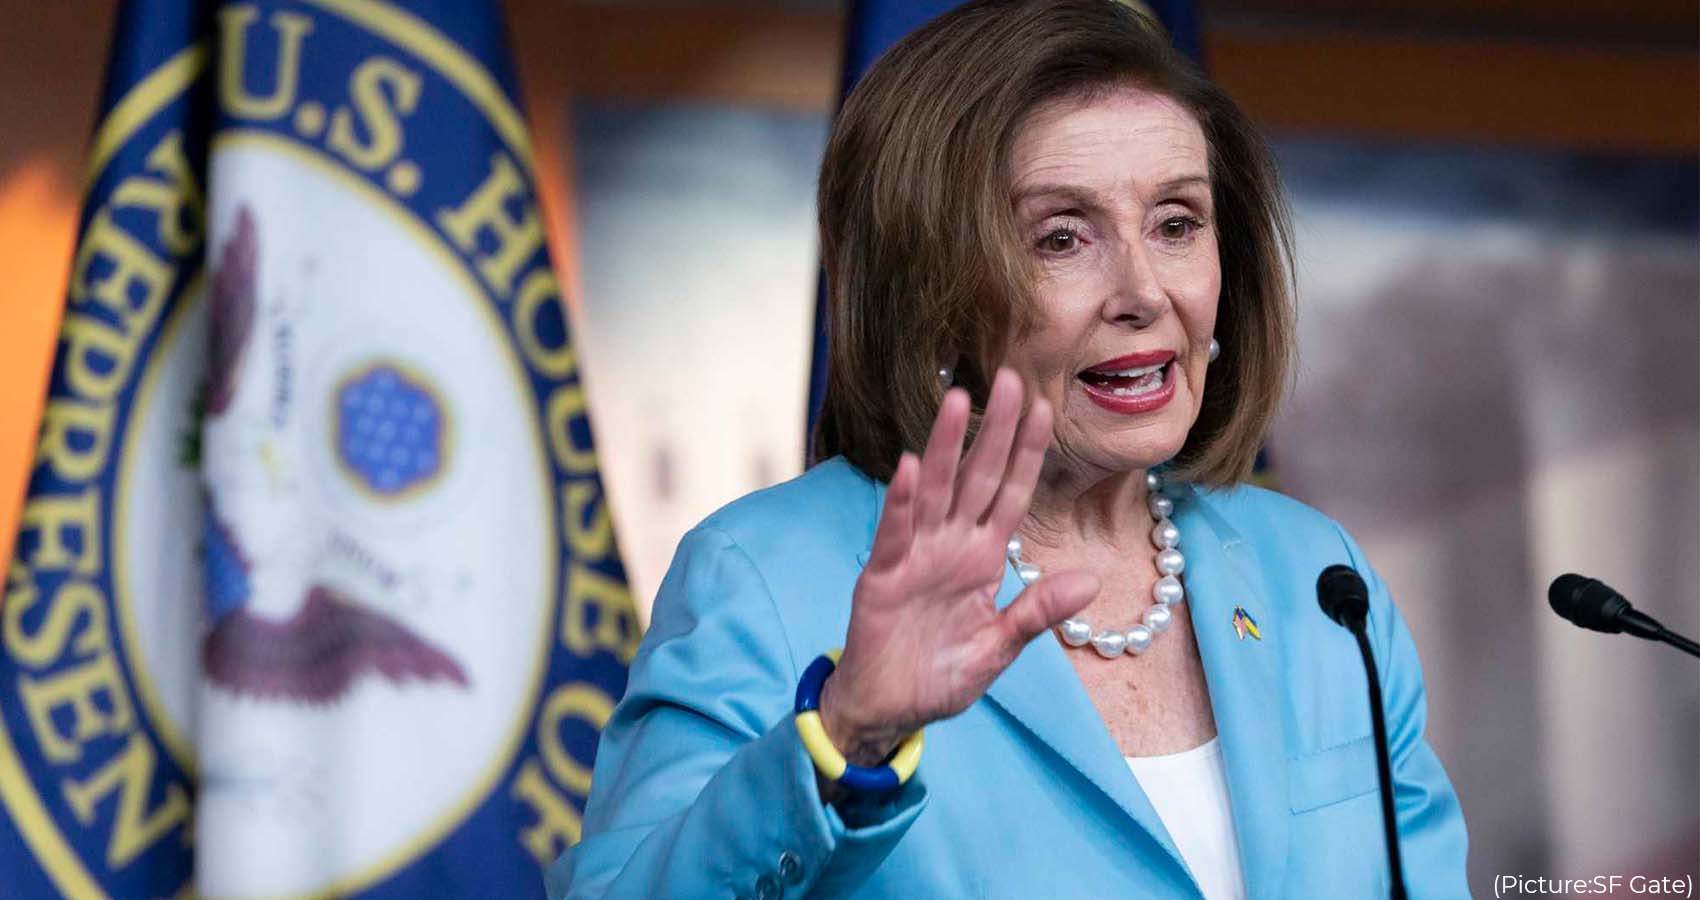 San Francisco Archbishop Bars Pelosi From Communion For  Her Support For Abortion